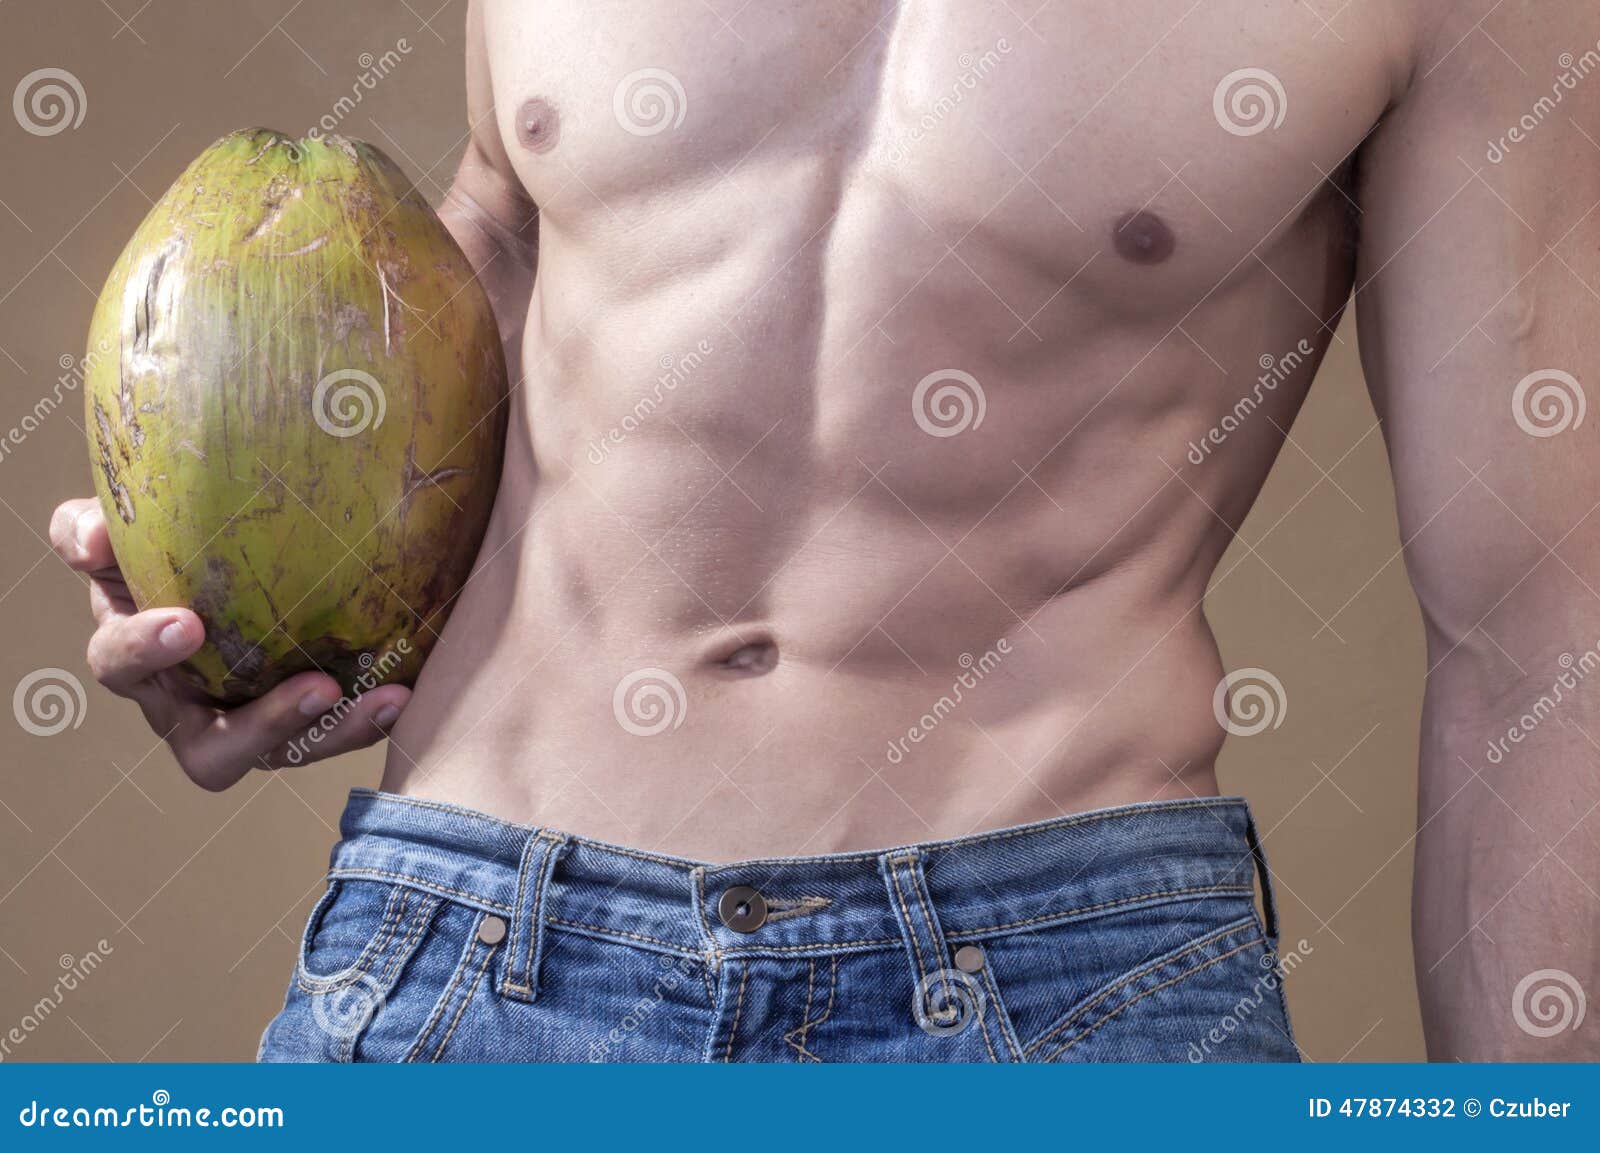 Man with chiseled chest and abs Stock Photo by ©nelka7812 50074733